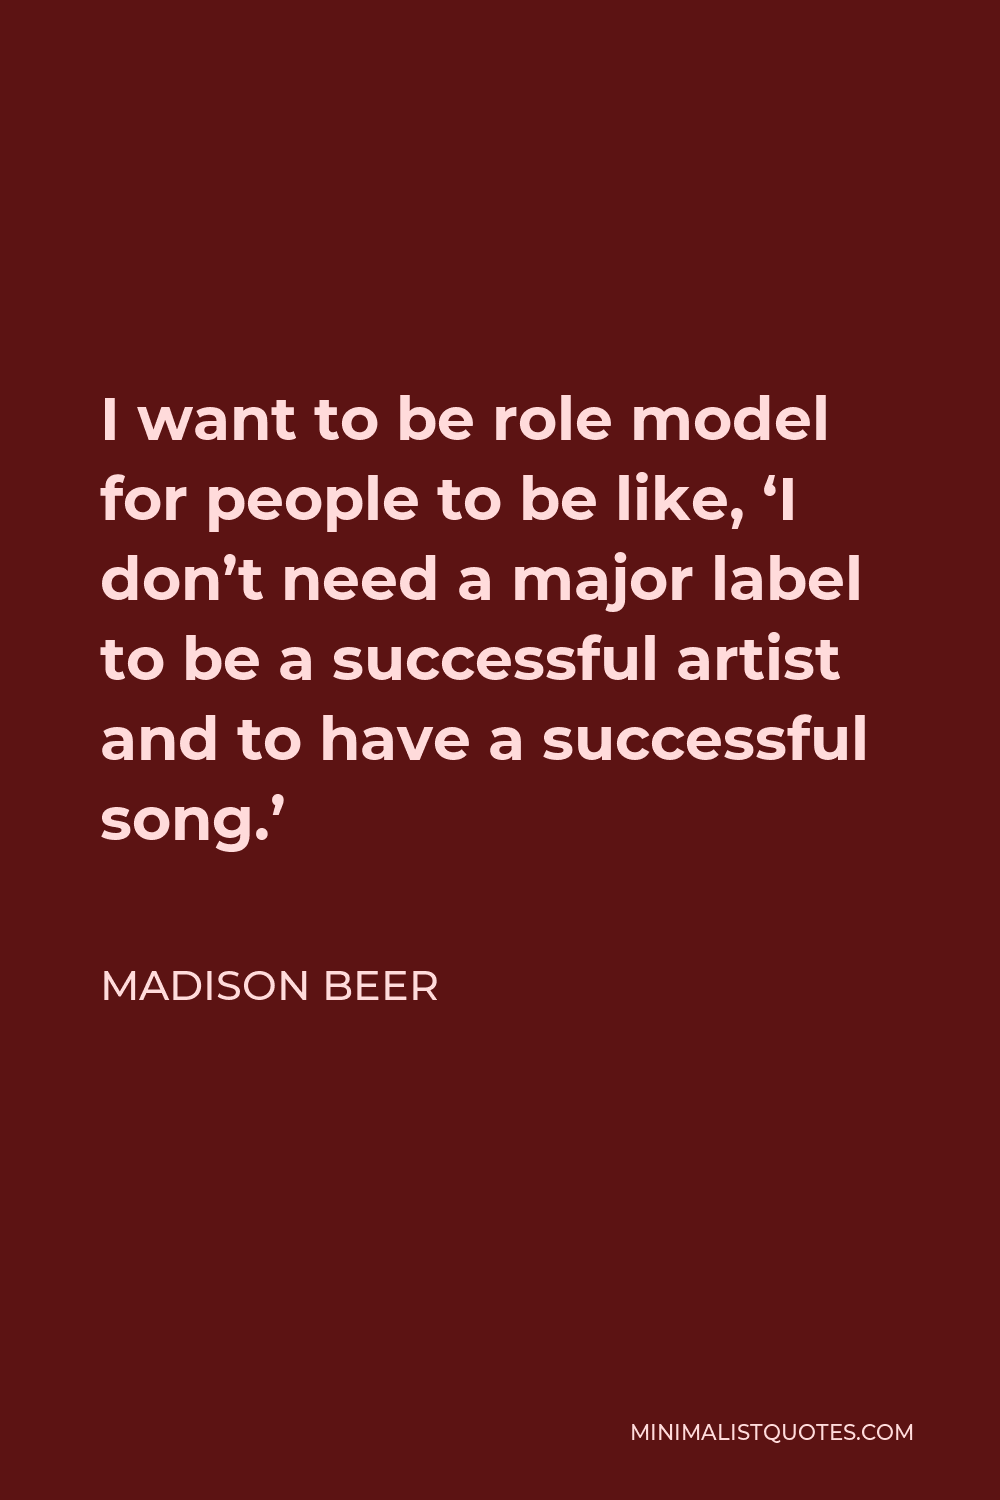 Madison Beer Quote - I want to be role model for people to be like, ‘I don’t need a major label to be a successful artist and to have a successful song.’